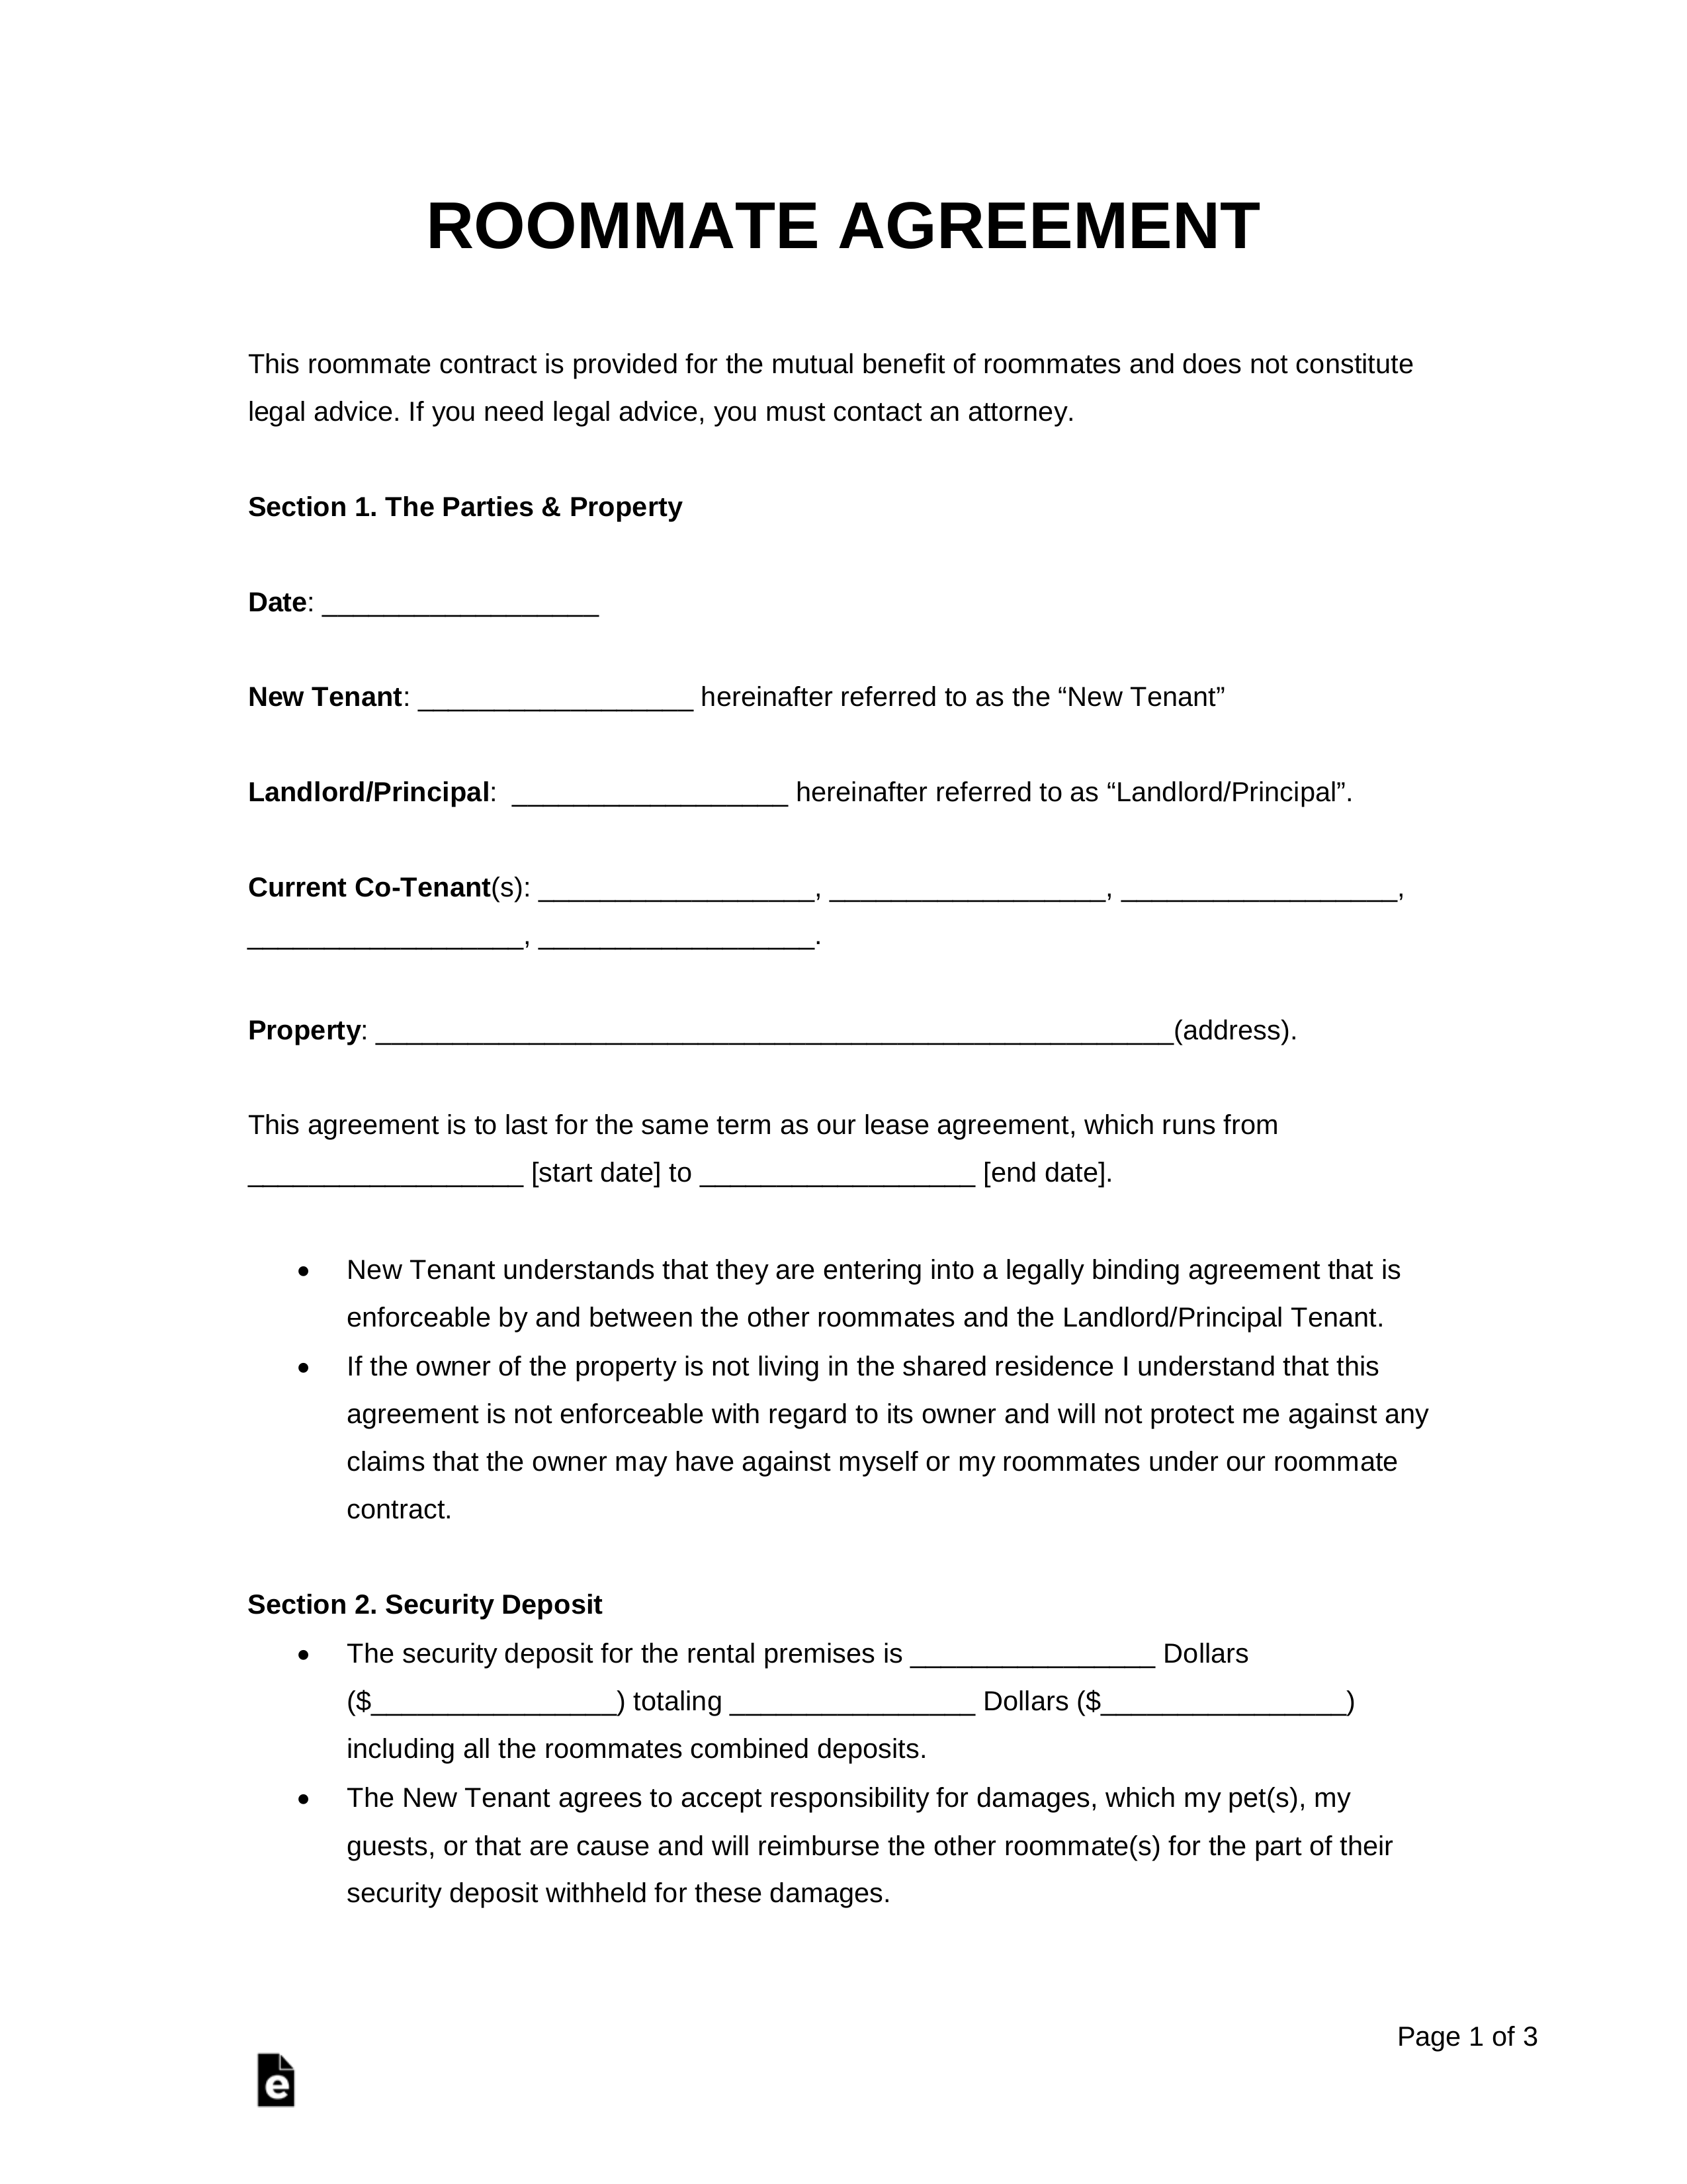 Free Roommate (room rental) Agreement Template - PDF  Word – eForms Intended For Security Deposit Agreement Between Roommates Intended For Security Deposit Agreement Between Roommates